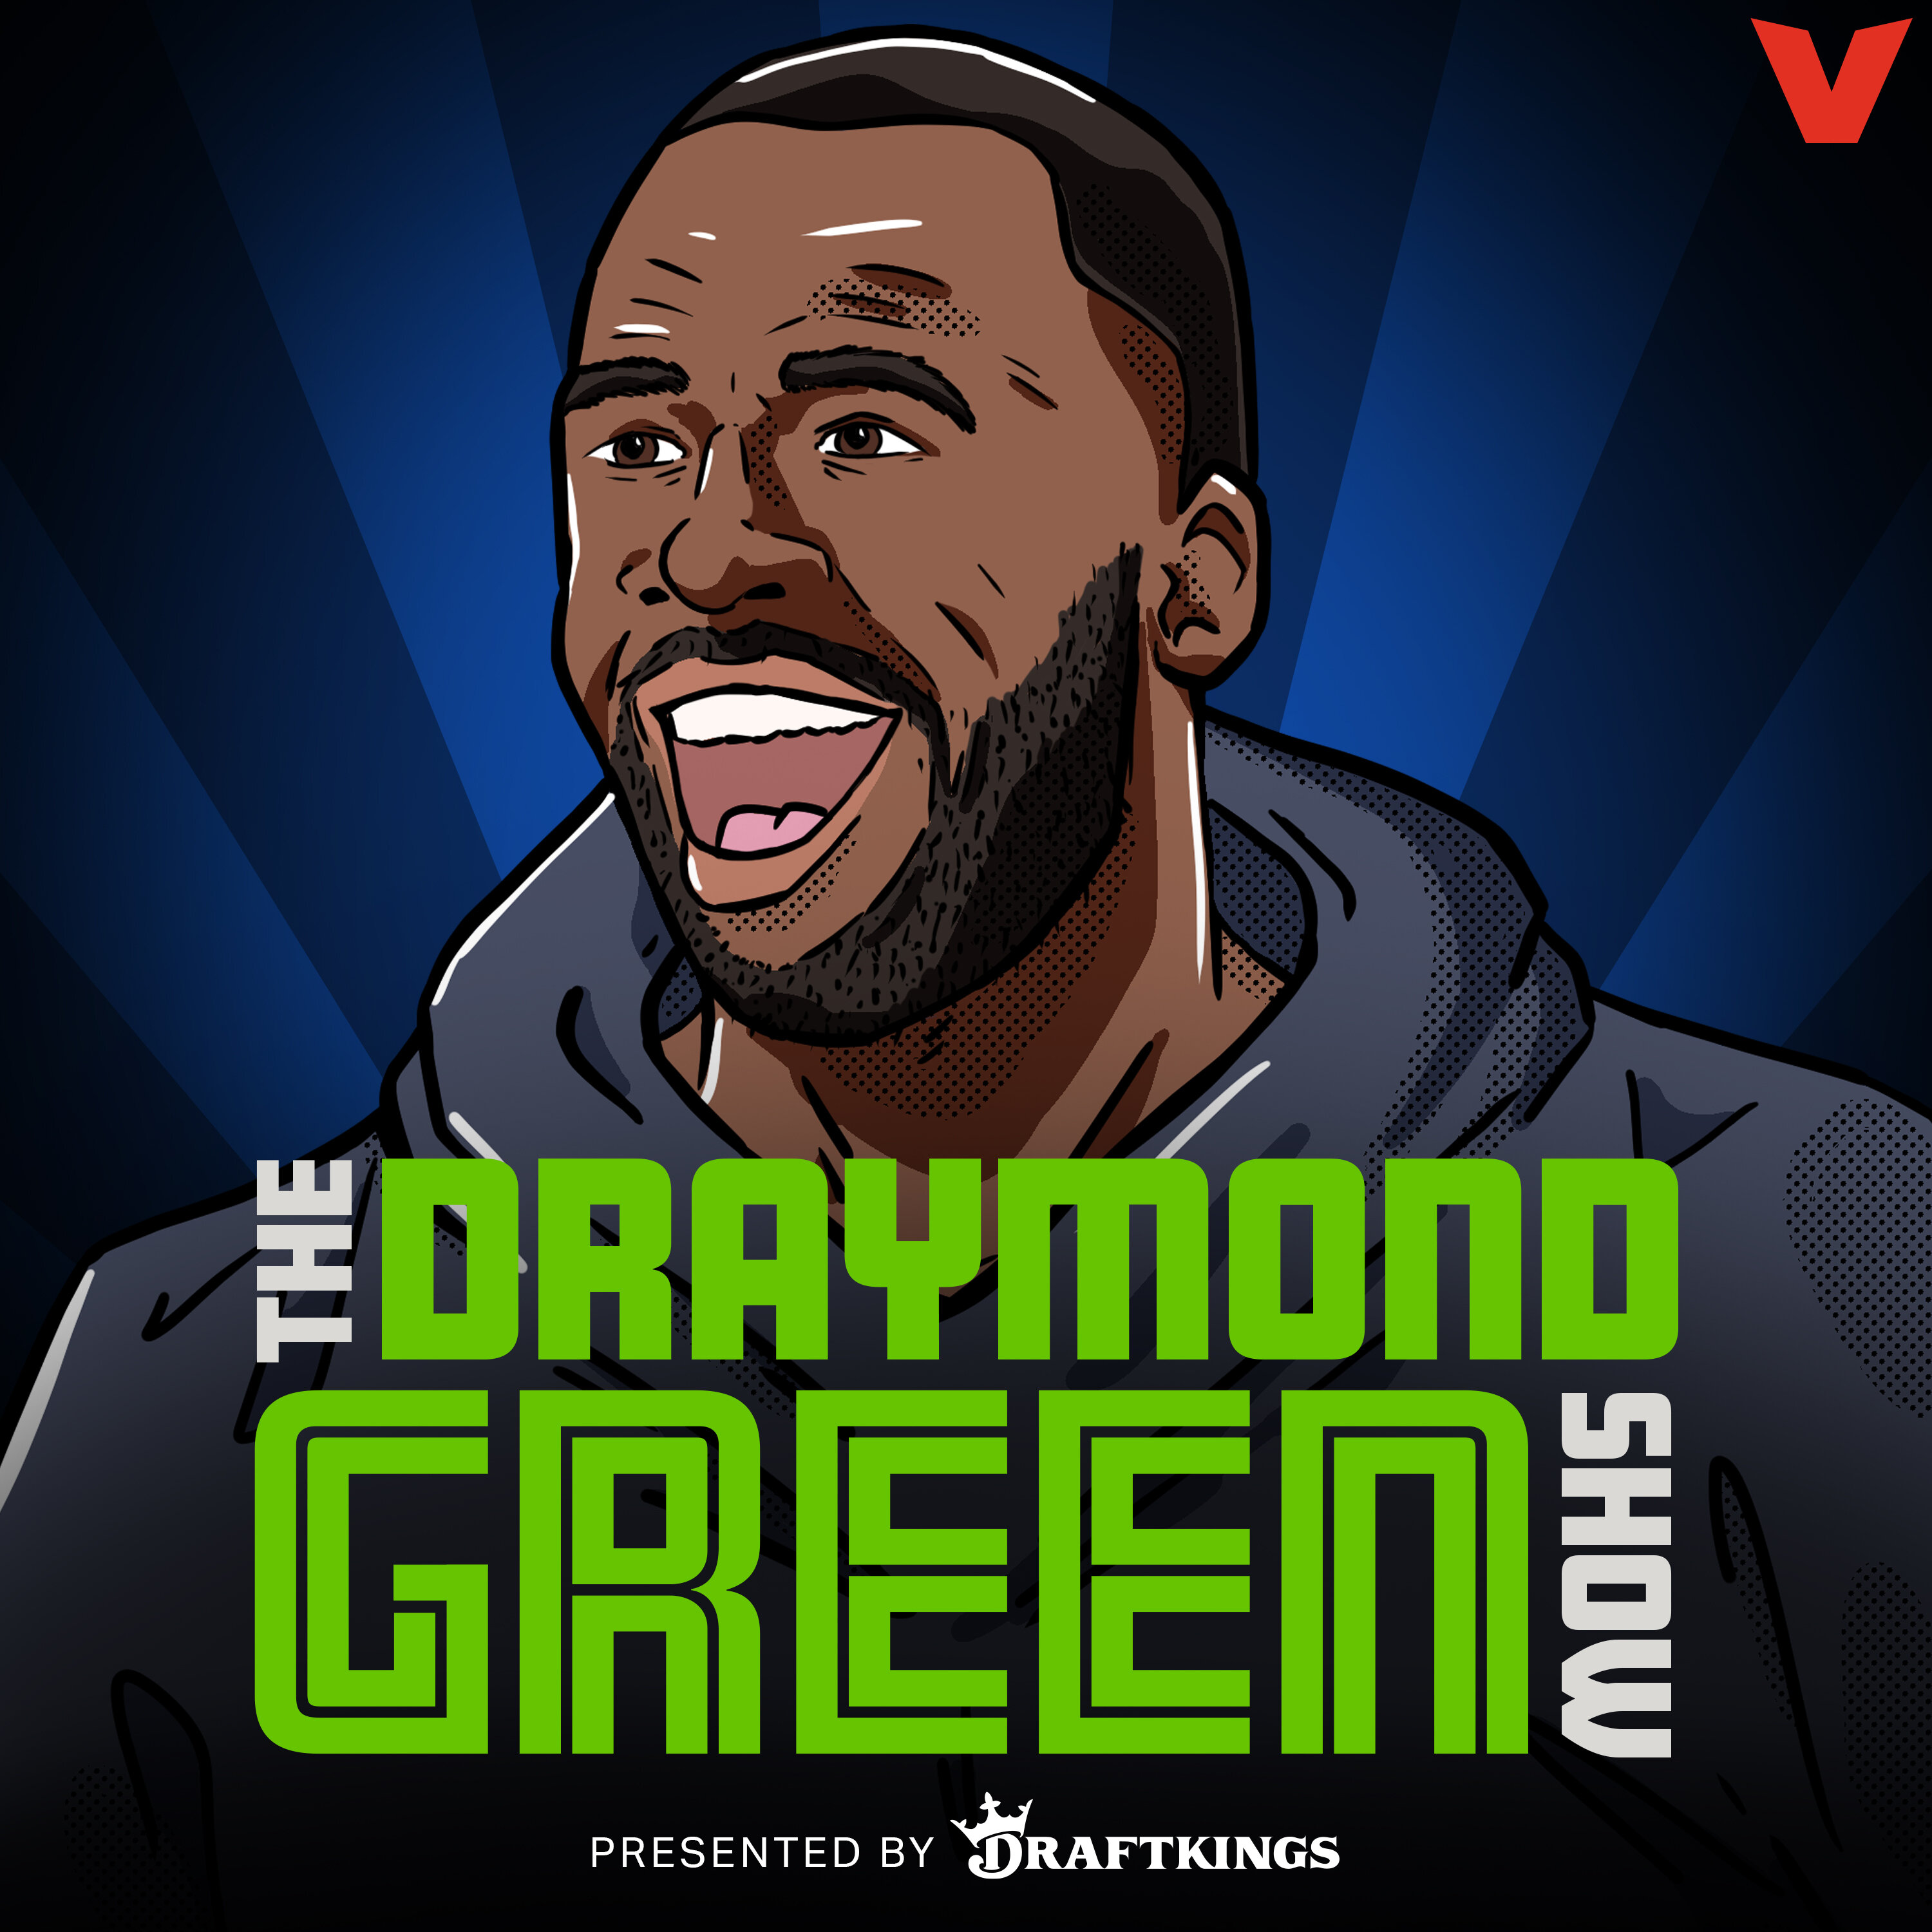 The Draymond Green Show:iHeartPodcasts and The Volume